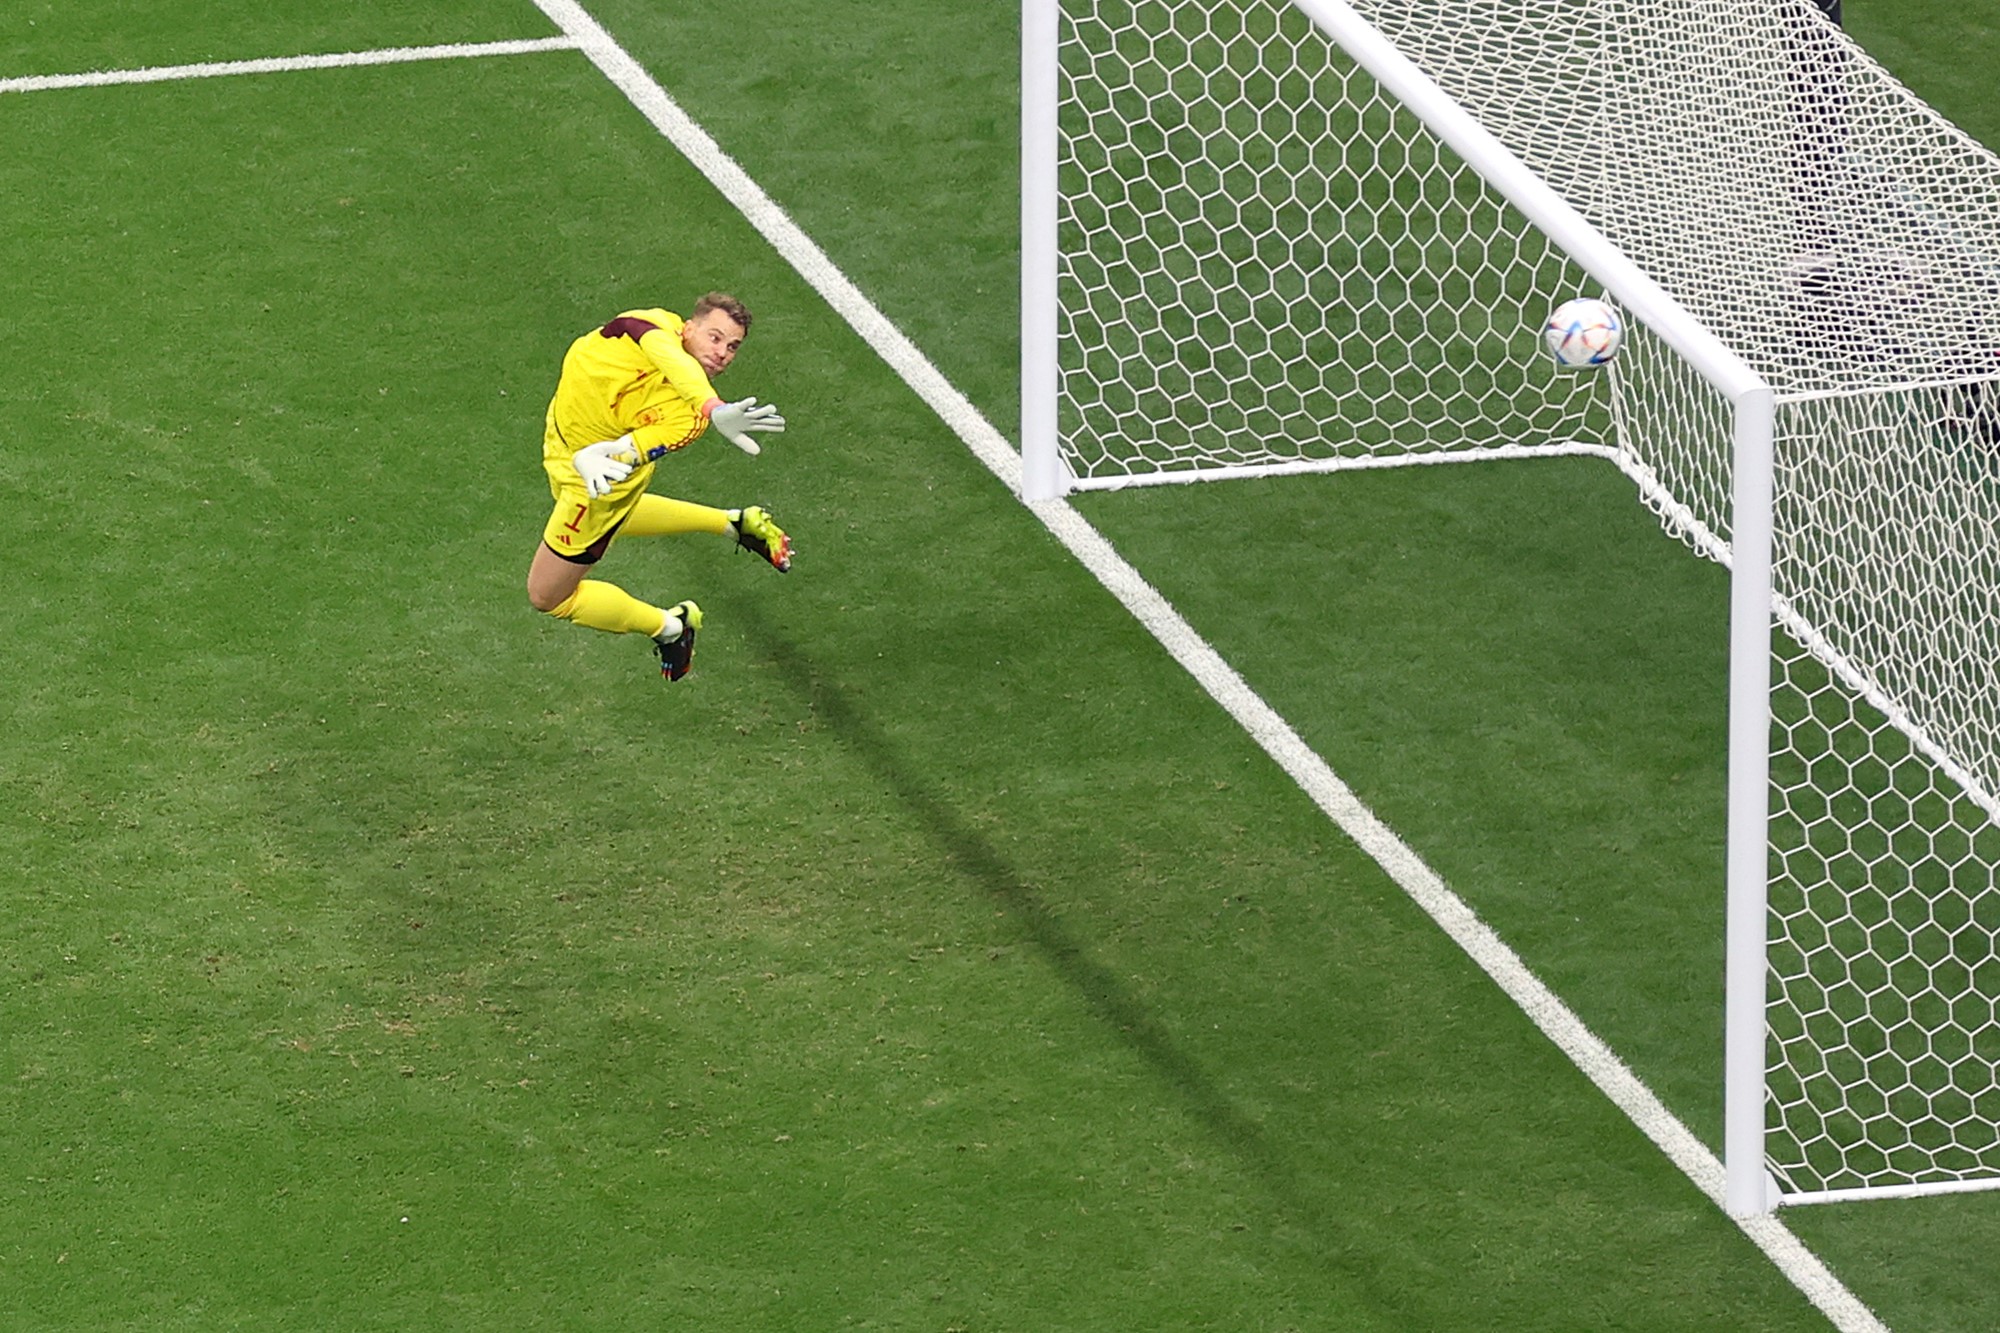 Manuel Neuer saves for Germany against Spain